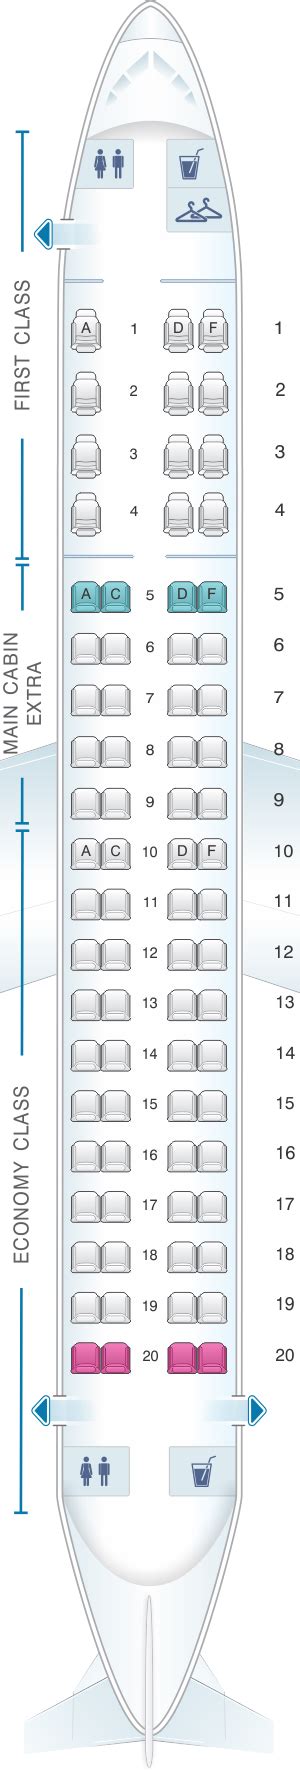 American airlines 175 embraer seat seatguru map e75 exit erj row class e70 emb first 787 embraer seats fewer explained United airlines seating chart erj 175. Embraer ERJ-175 Seat Maps, Specs & Amenities | Delta Air Lines. Embraer 175 regional jet american airlines seat map Embraer 175 seating Embraer 175 united seat map.. 